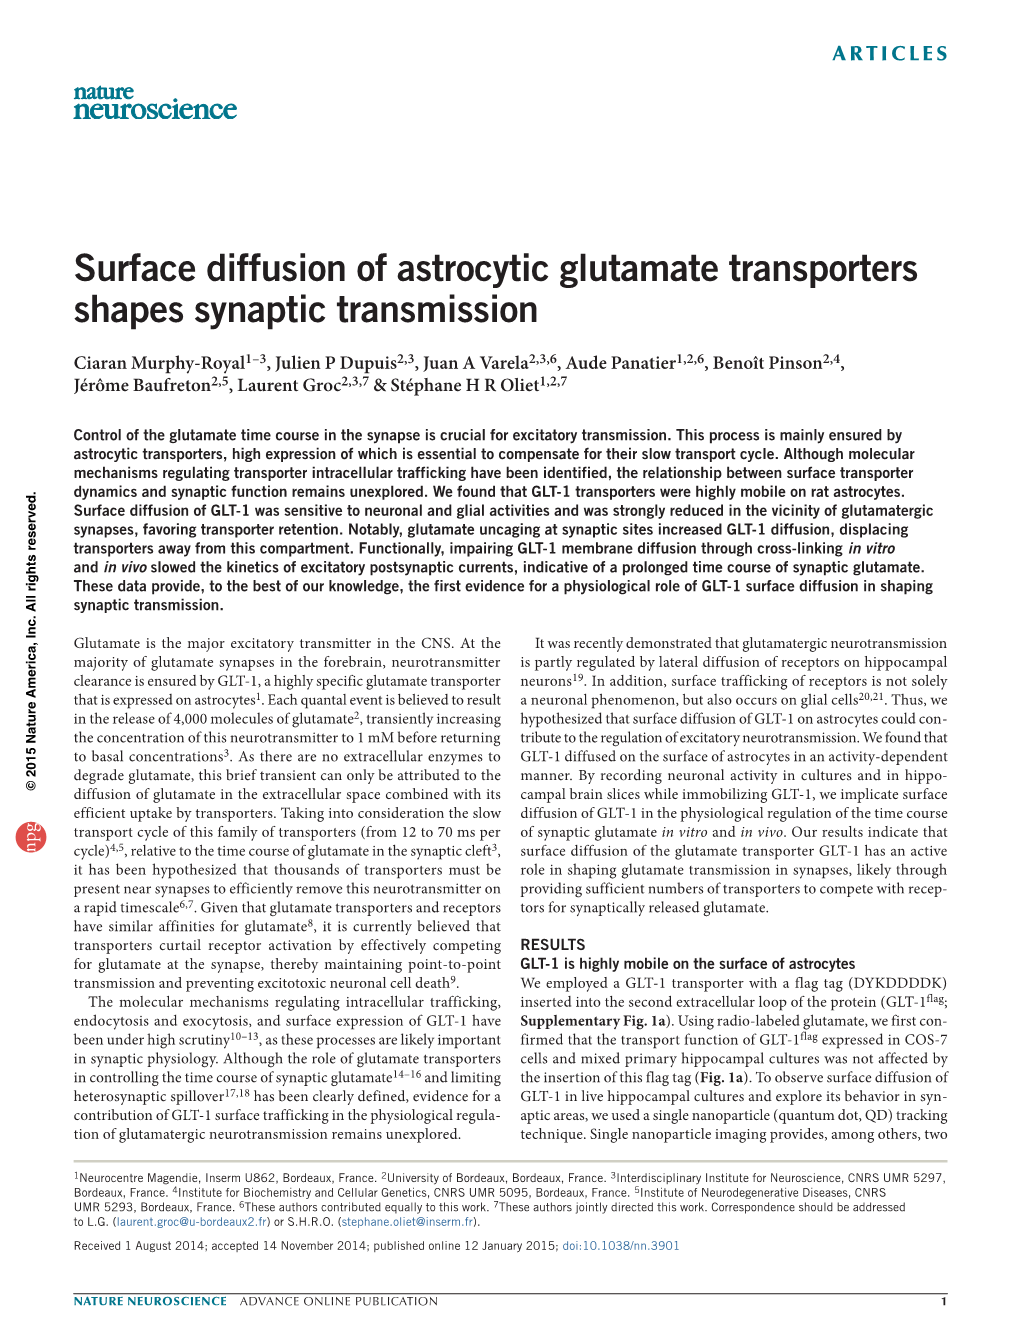 Surface Diffusion of Astrocytic Glutamate Transporters Shapes Synaptic Transmission